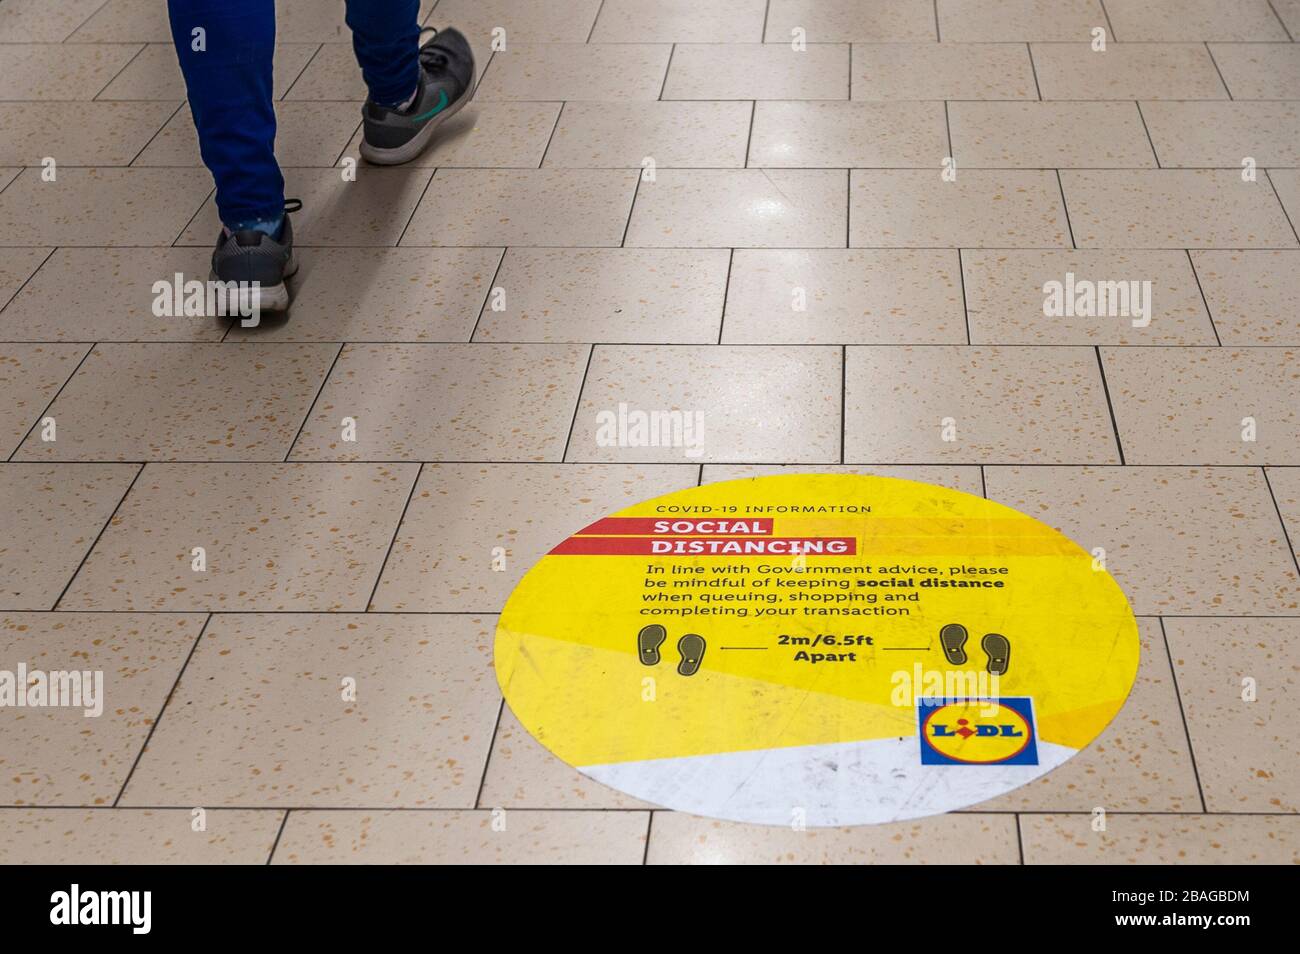 Clonakilty, West Cork, Ireland. 27th Mar, 2020. A woman walks past a social distancing sign in Lidl Supermarket, Clonakilty. Three more people have died from Covid-19 in the Republic today. This brings the total to 22 deaths with 2,121 cases of Covid-19 in Eire. Credit: Andy Gibson/Alamy Live News Stock Photo